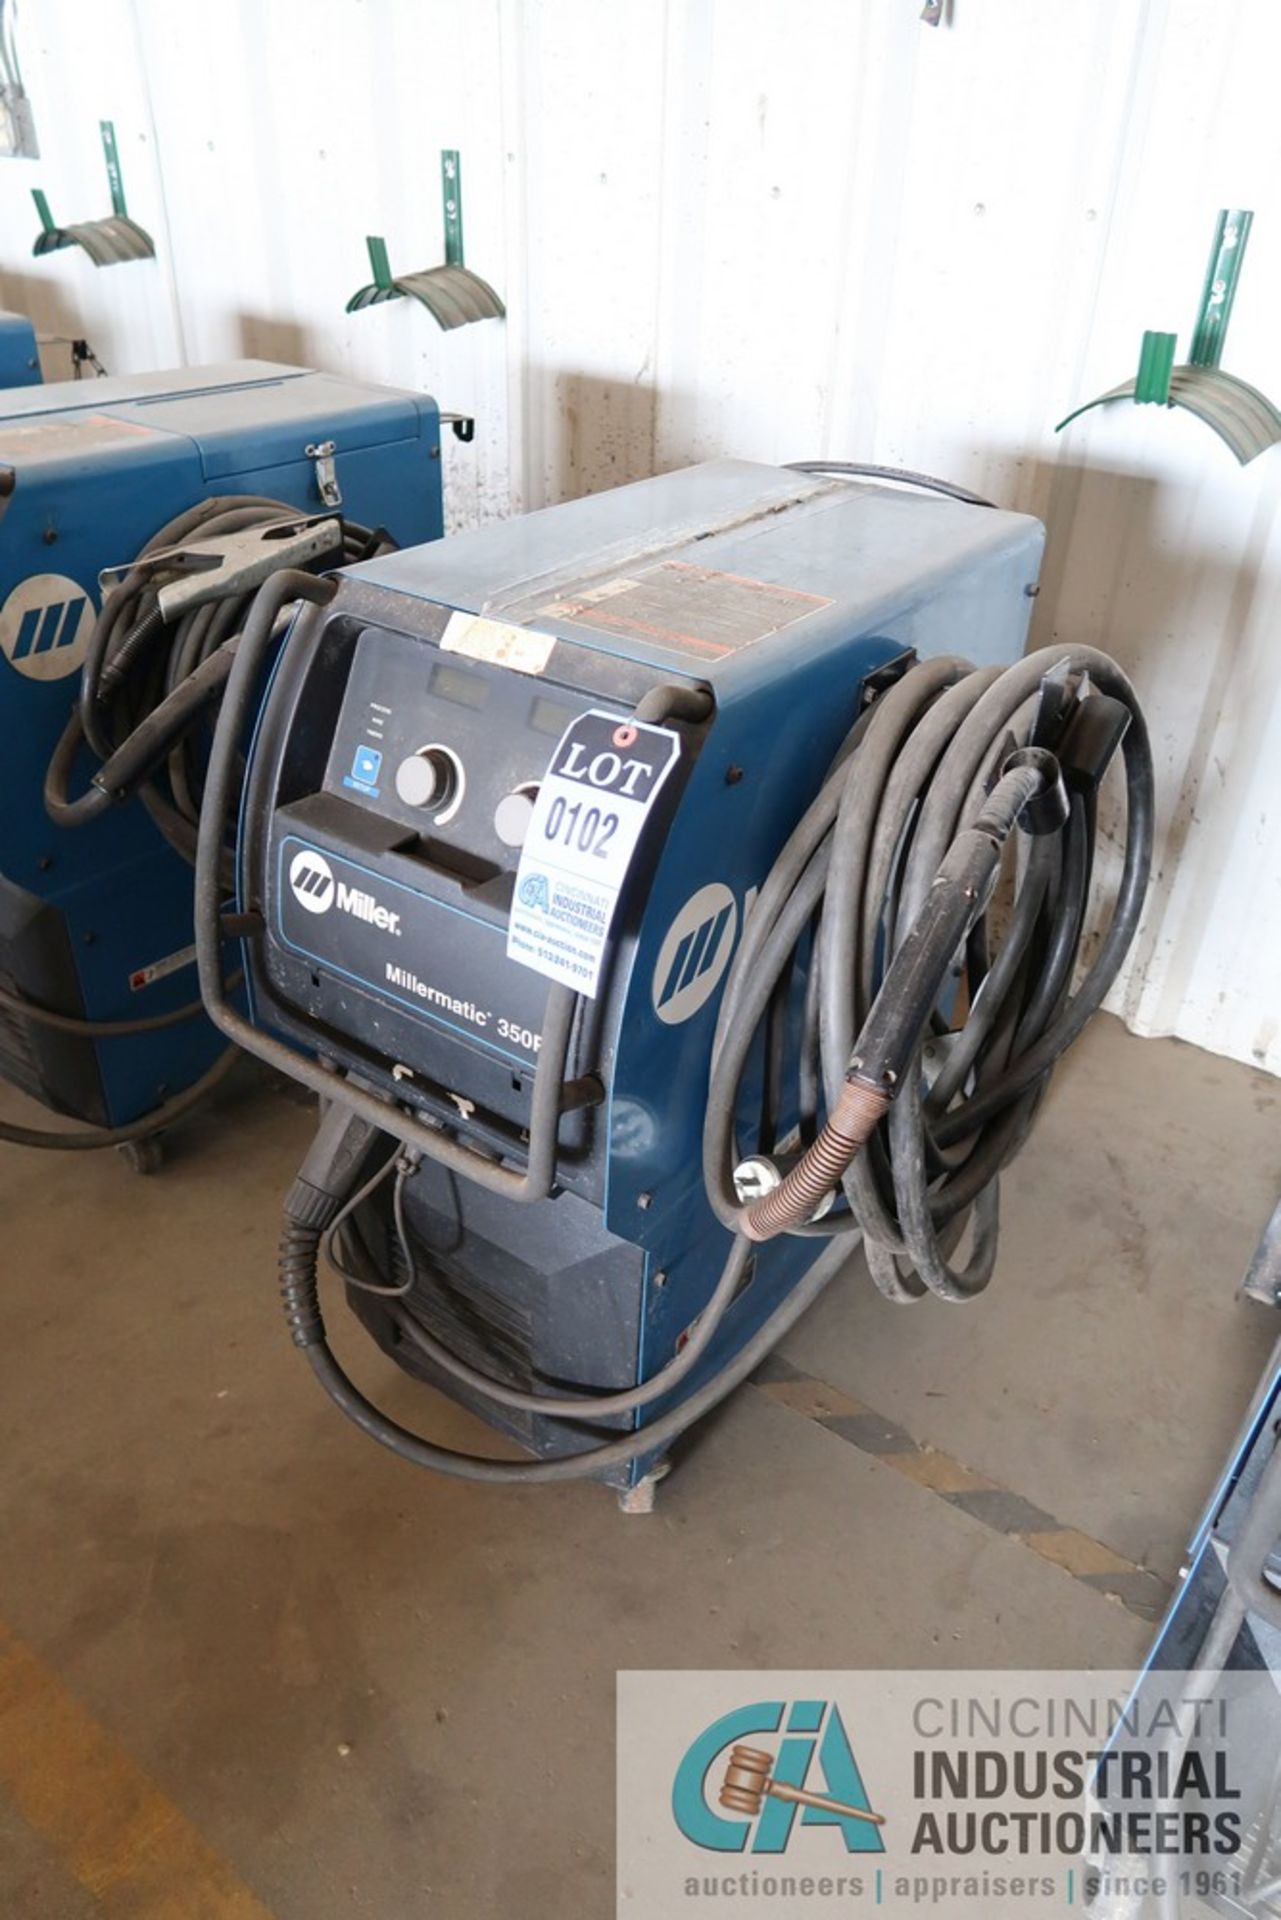 MILLER MODEL MILLERMATIC 350P MIG WELDING POWER SOURCE S/N MB310556N WITH BUILT IN WIRE FEEDER AND - Image 2 of 4